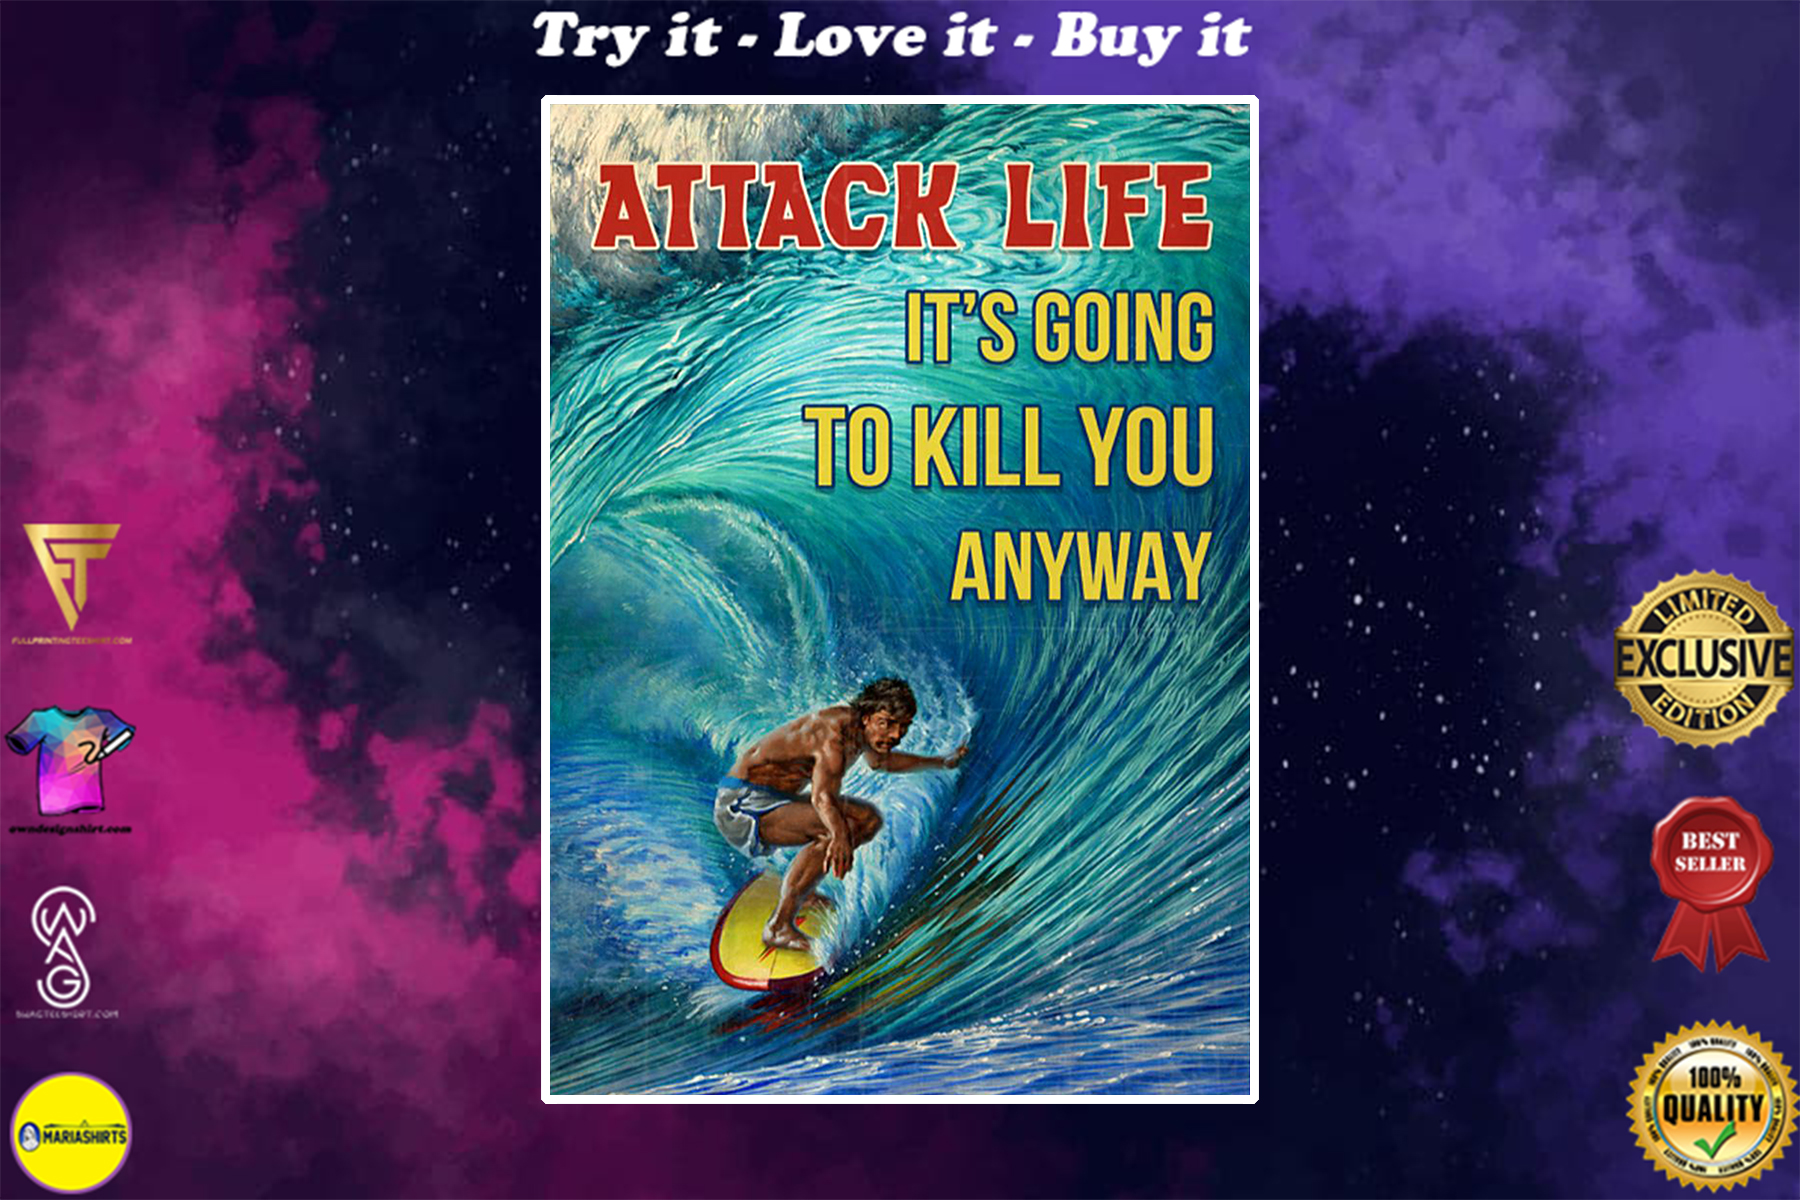 vintage surfing attack life its going to kill you anyway poster